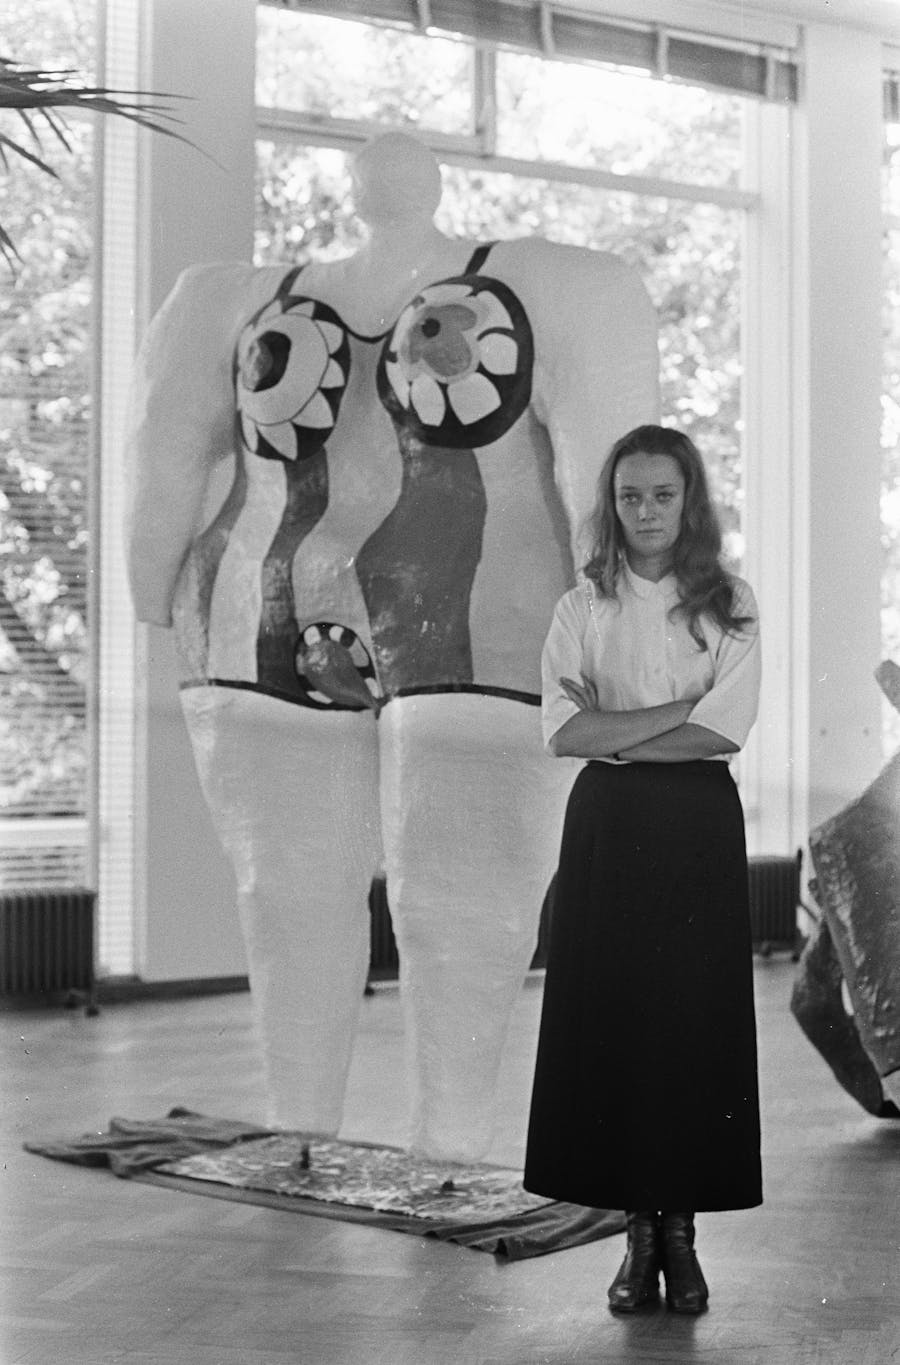 Niki de Saint Phalle at the Stedelijk Museum in Amsterdam. Nikki in front of her works. Photo by Jack de Nijs for Anefo. Photo via Wikimedia Commons, Licence CC0